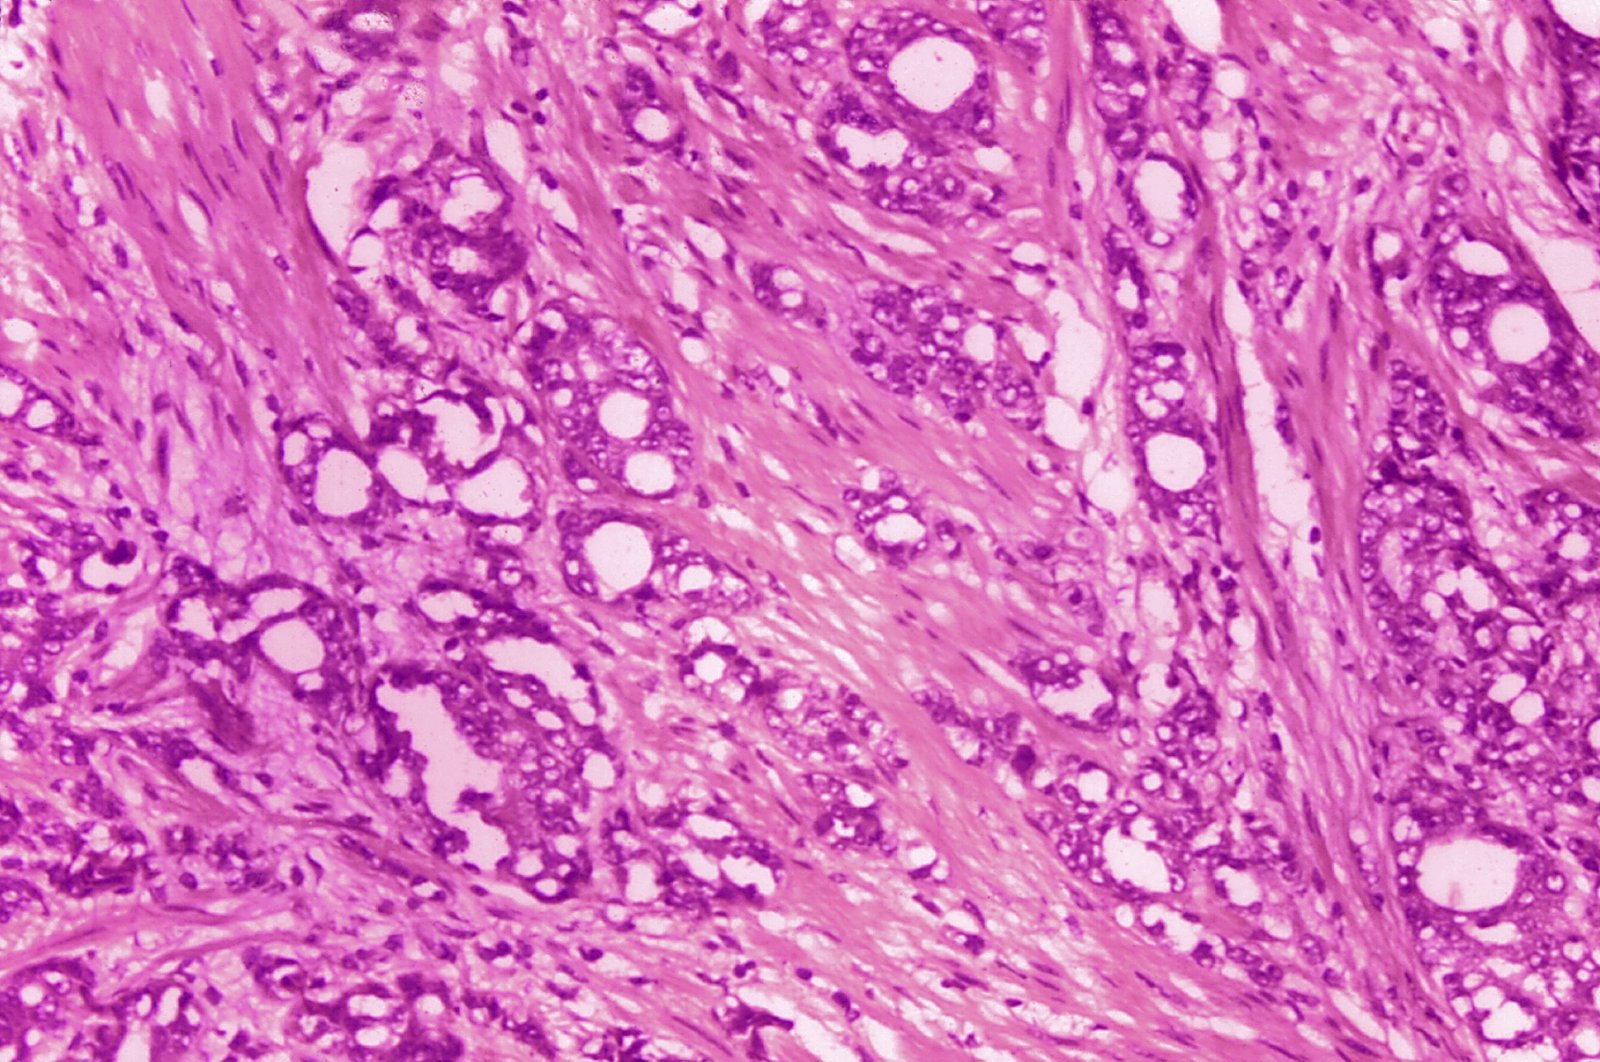 A microscope image shows changes in cells indicative of adenocarcinoma of the prostate, 1974. (CDC via AP)